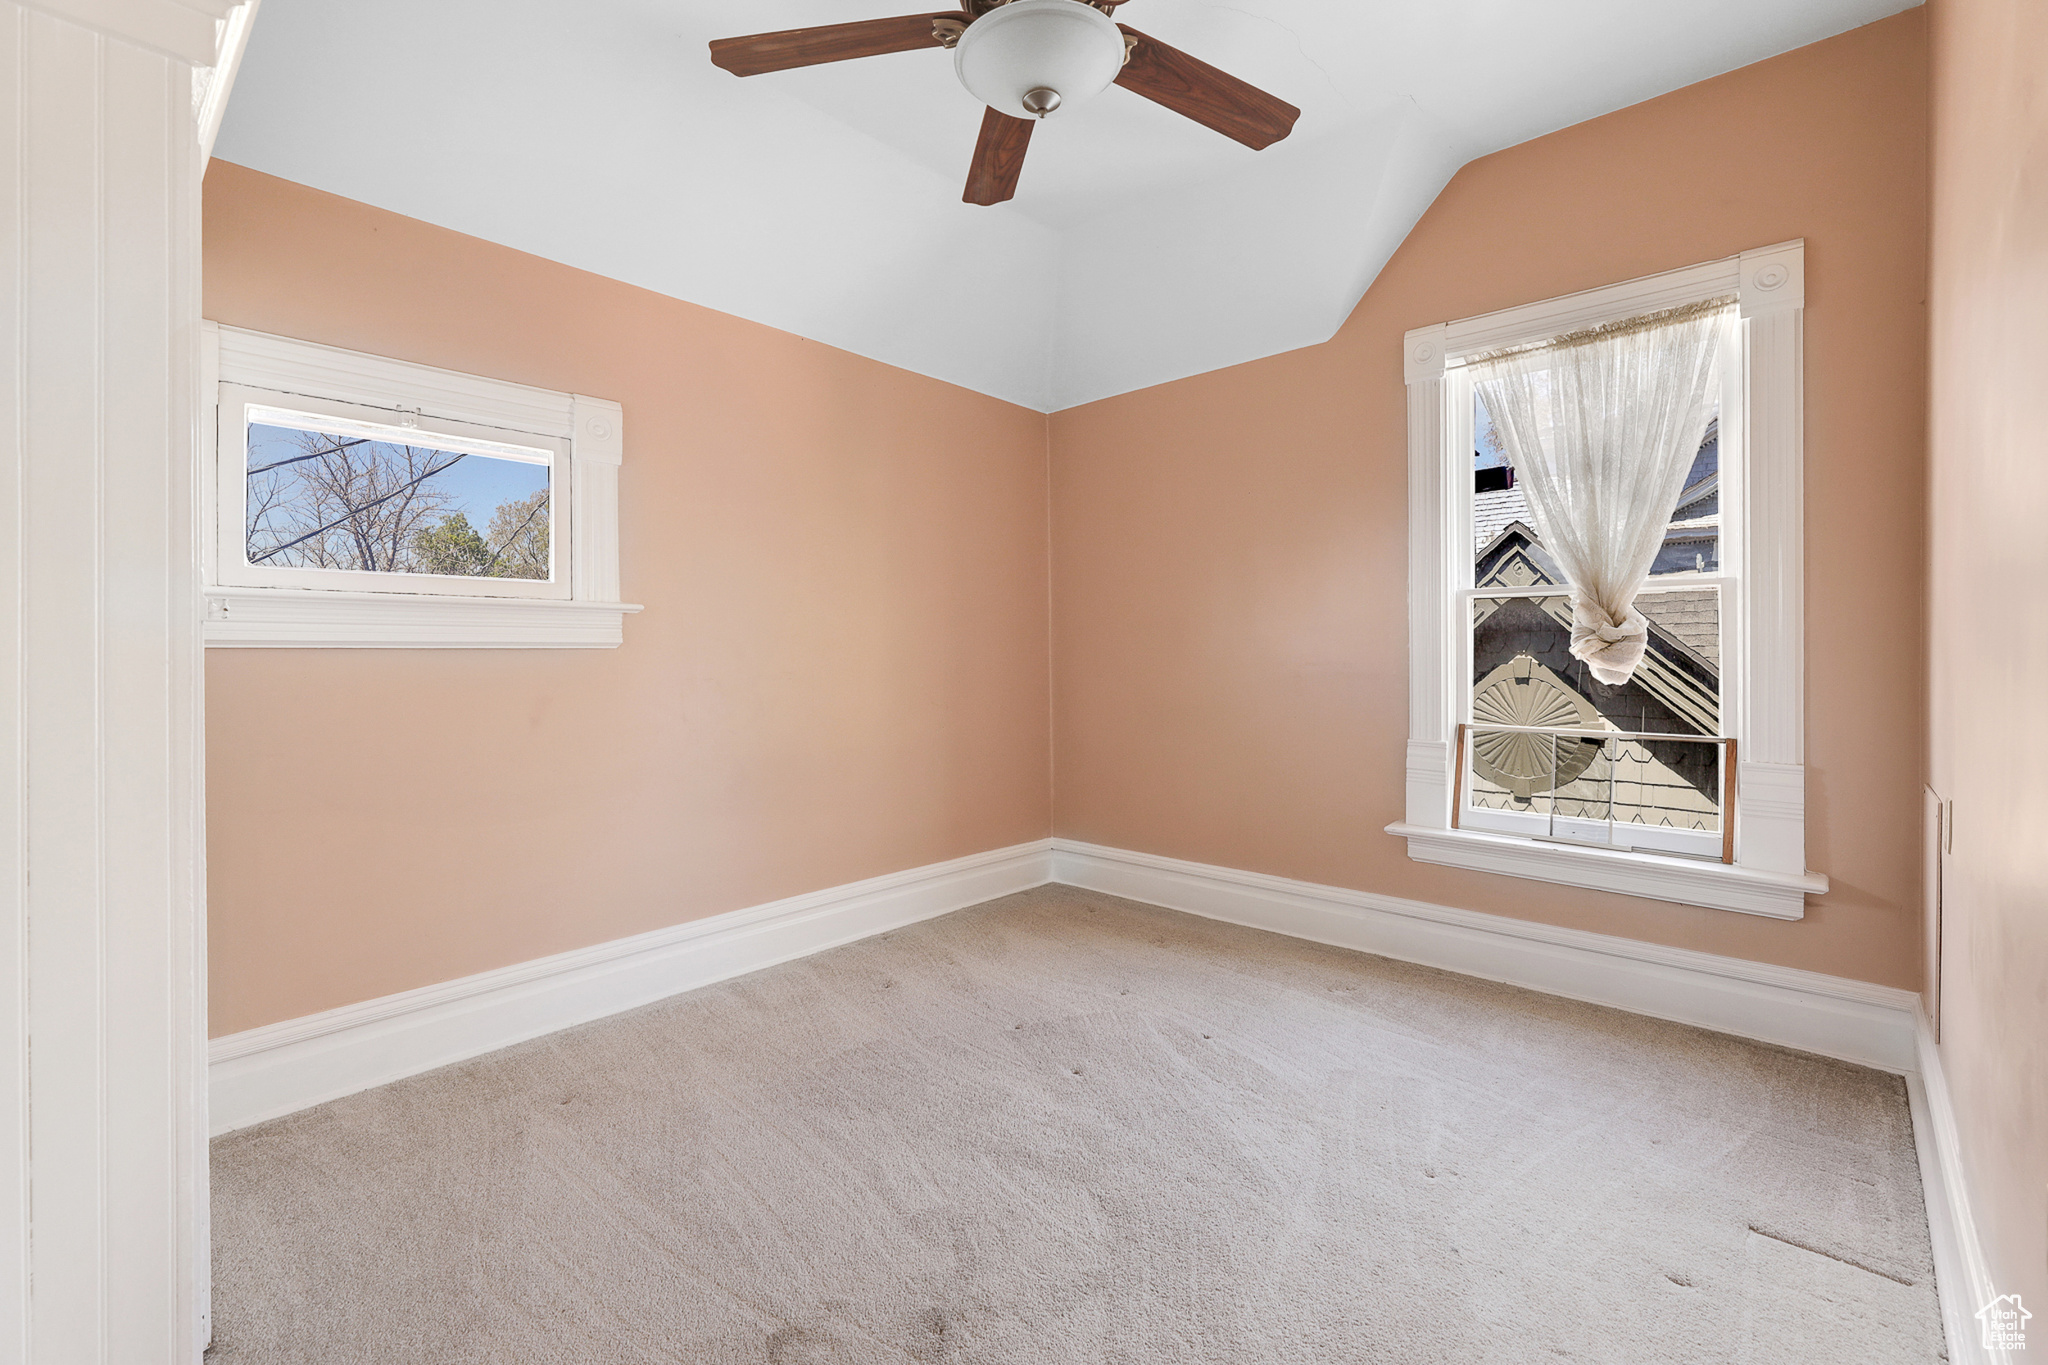 2nd Bedroom Carpeted spare room featuring ceiling fan and lofted ceiling